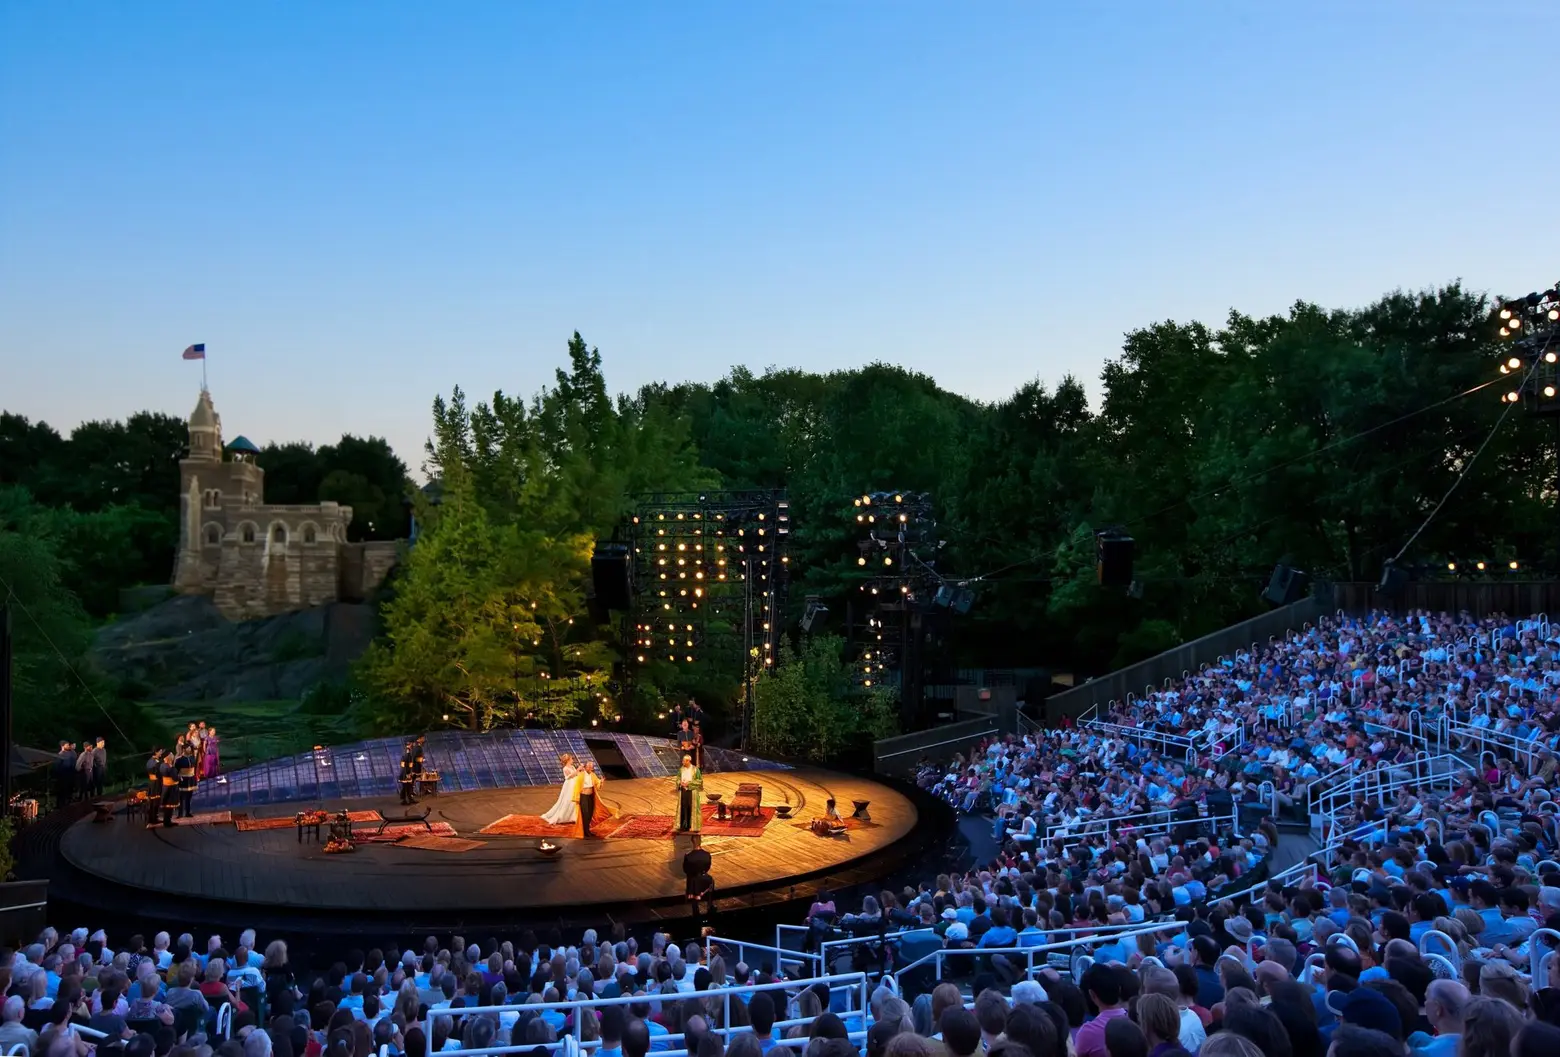 NYC’s free Shakespeare in the Park program returns this week